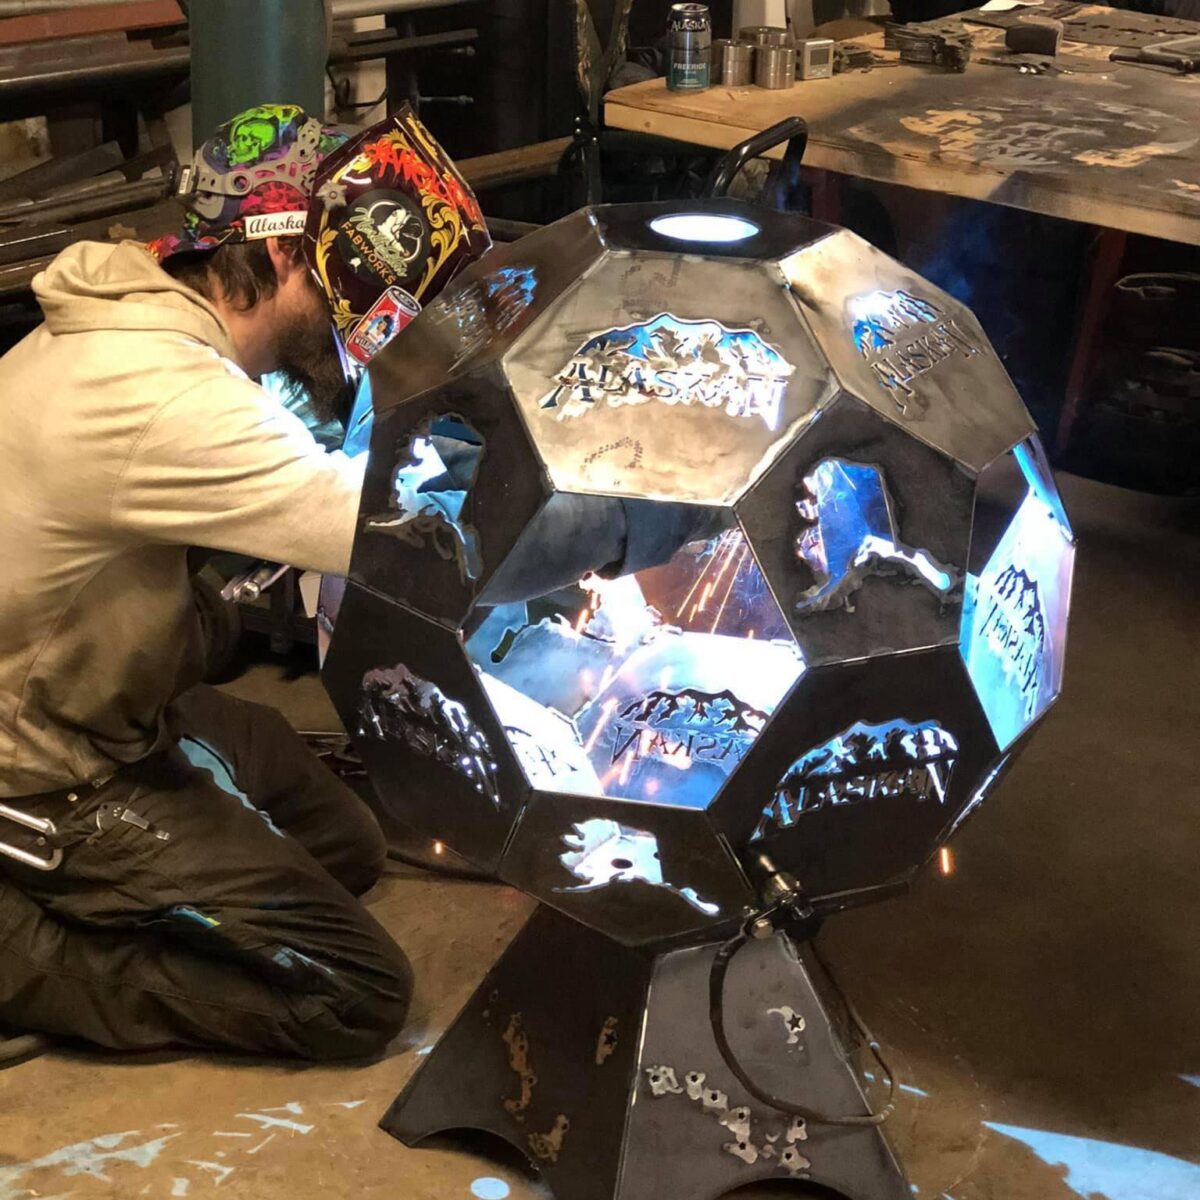 A man with welding mask kneeling down and working on a round metal object.